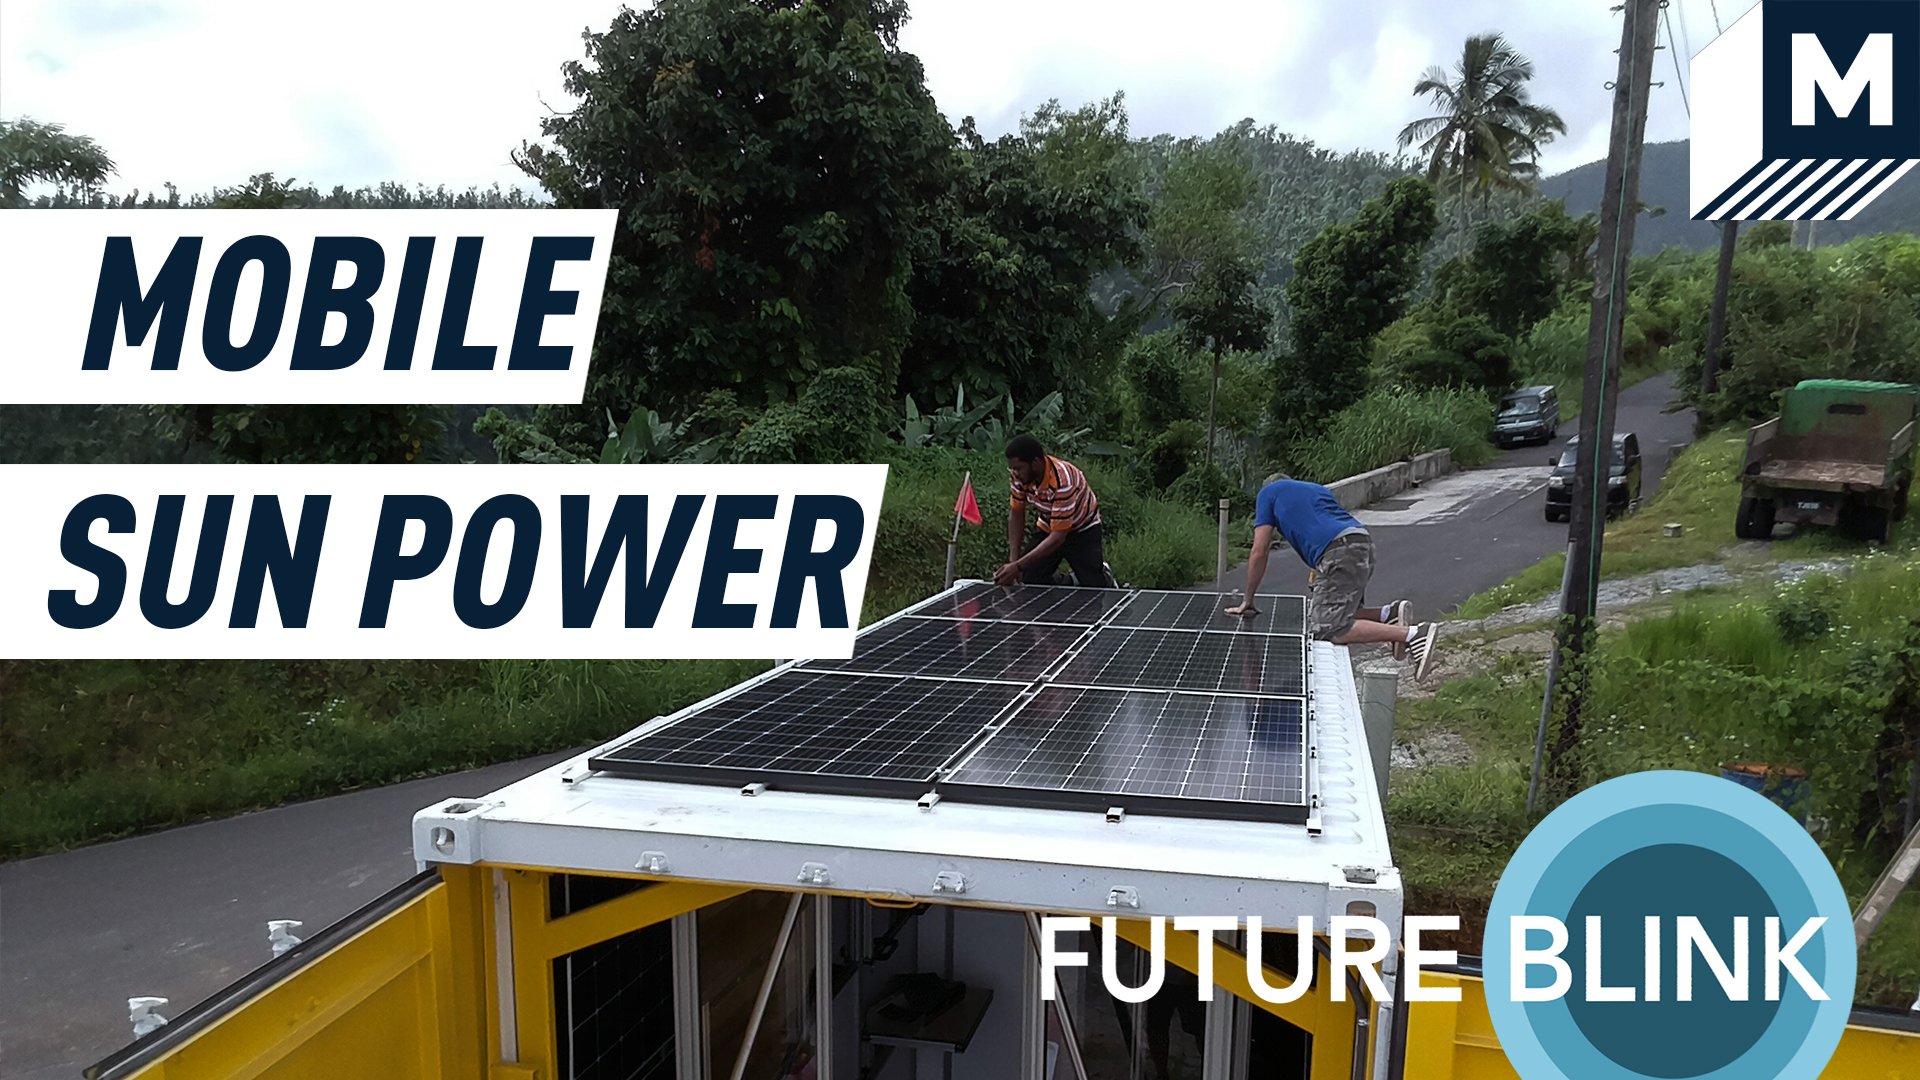 A mobile nanogrid with solar panels on the rooftop has stopped on a road near a forest. Caption reads